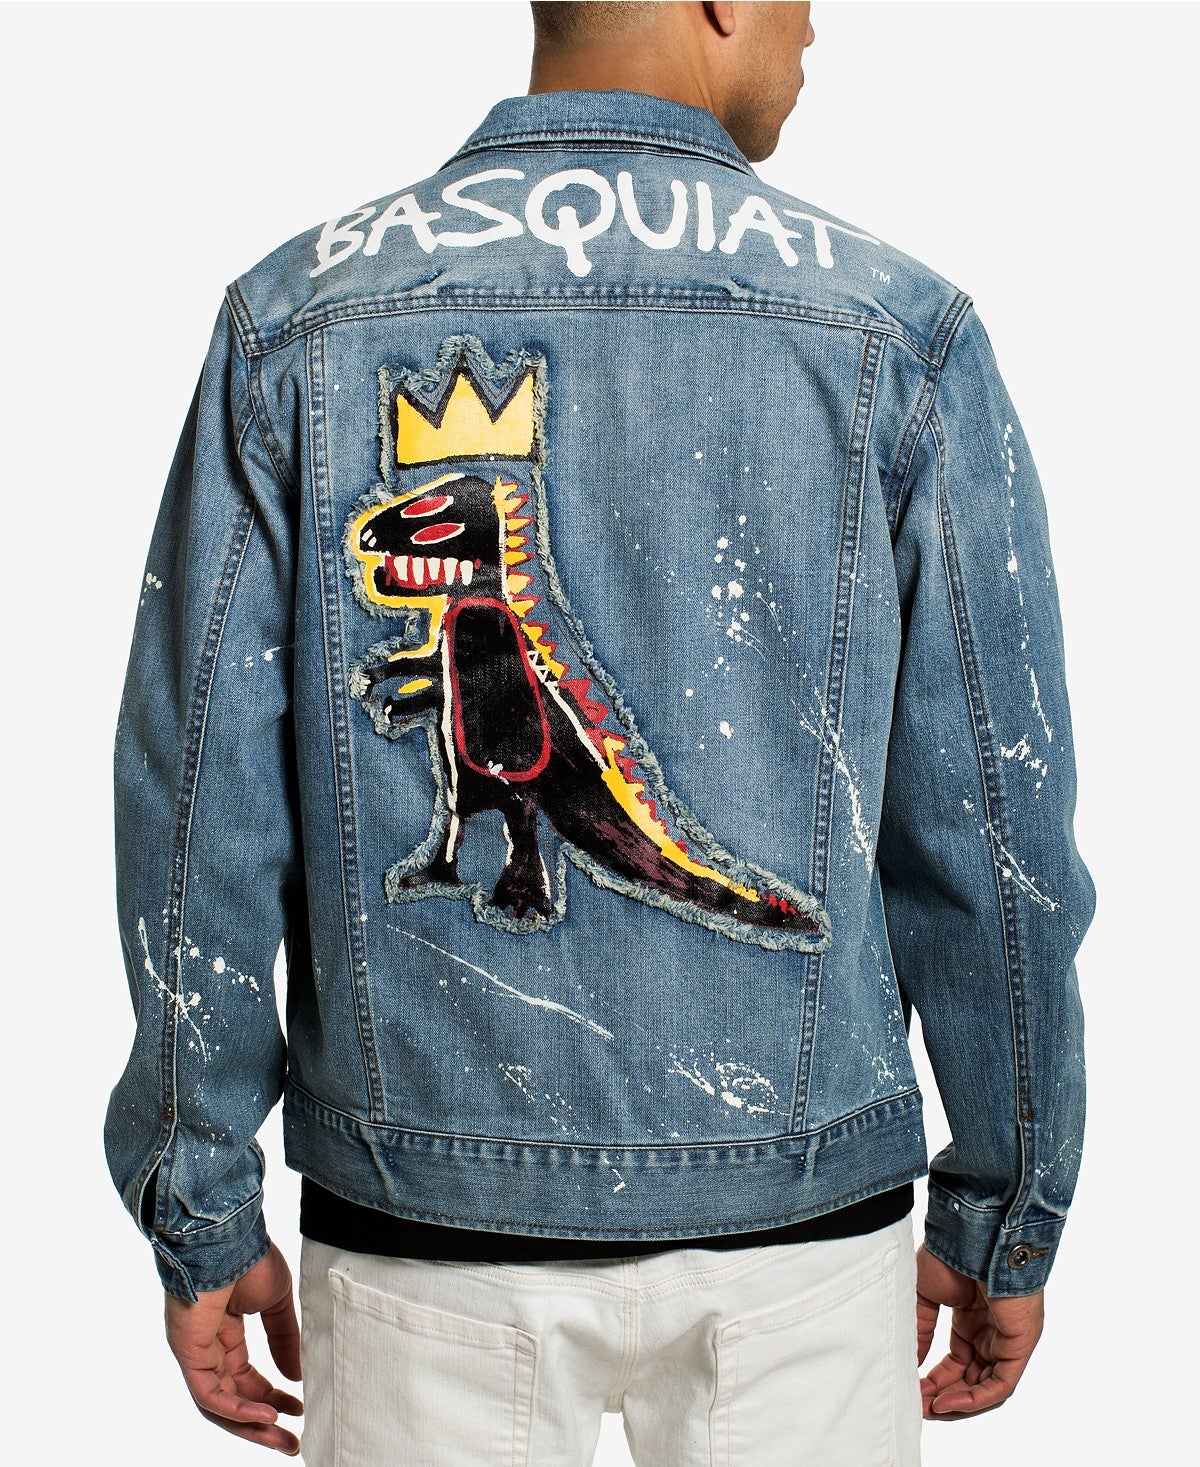 Sean John Launches Collaboration With Jean-Michel Basquiat Artwork To Celebrate Its 20th Anniversary
